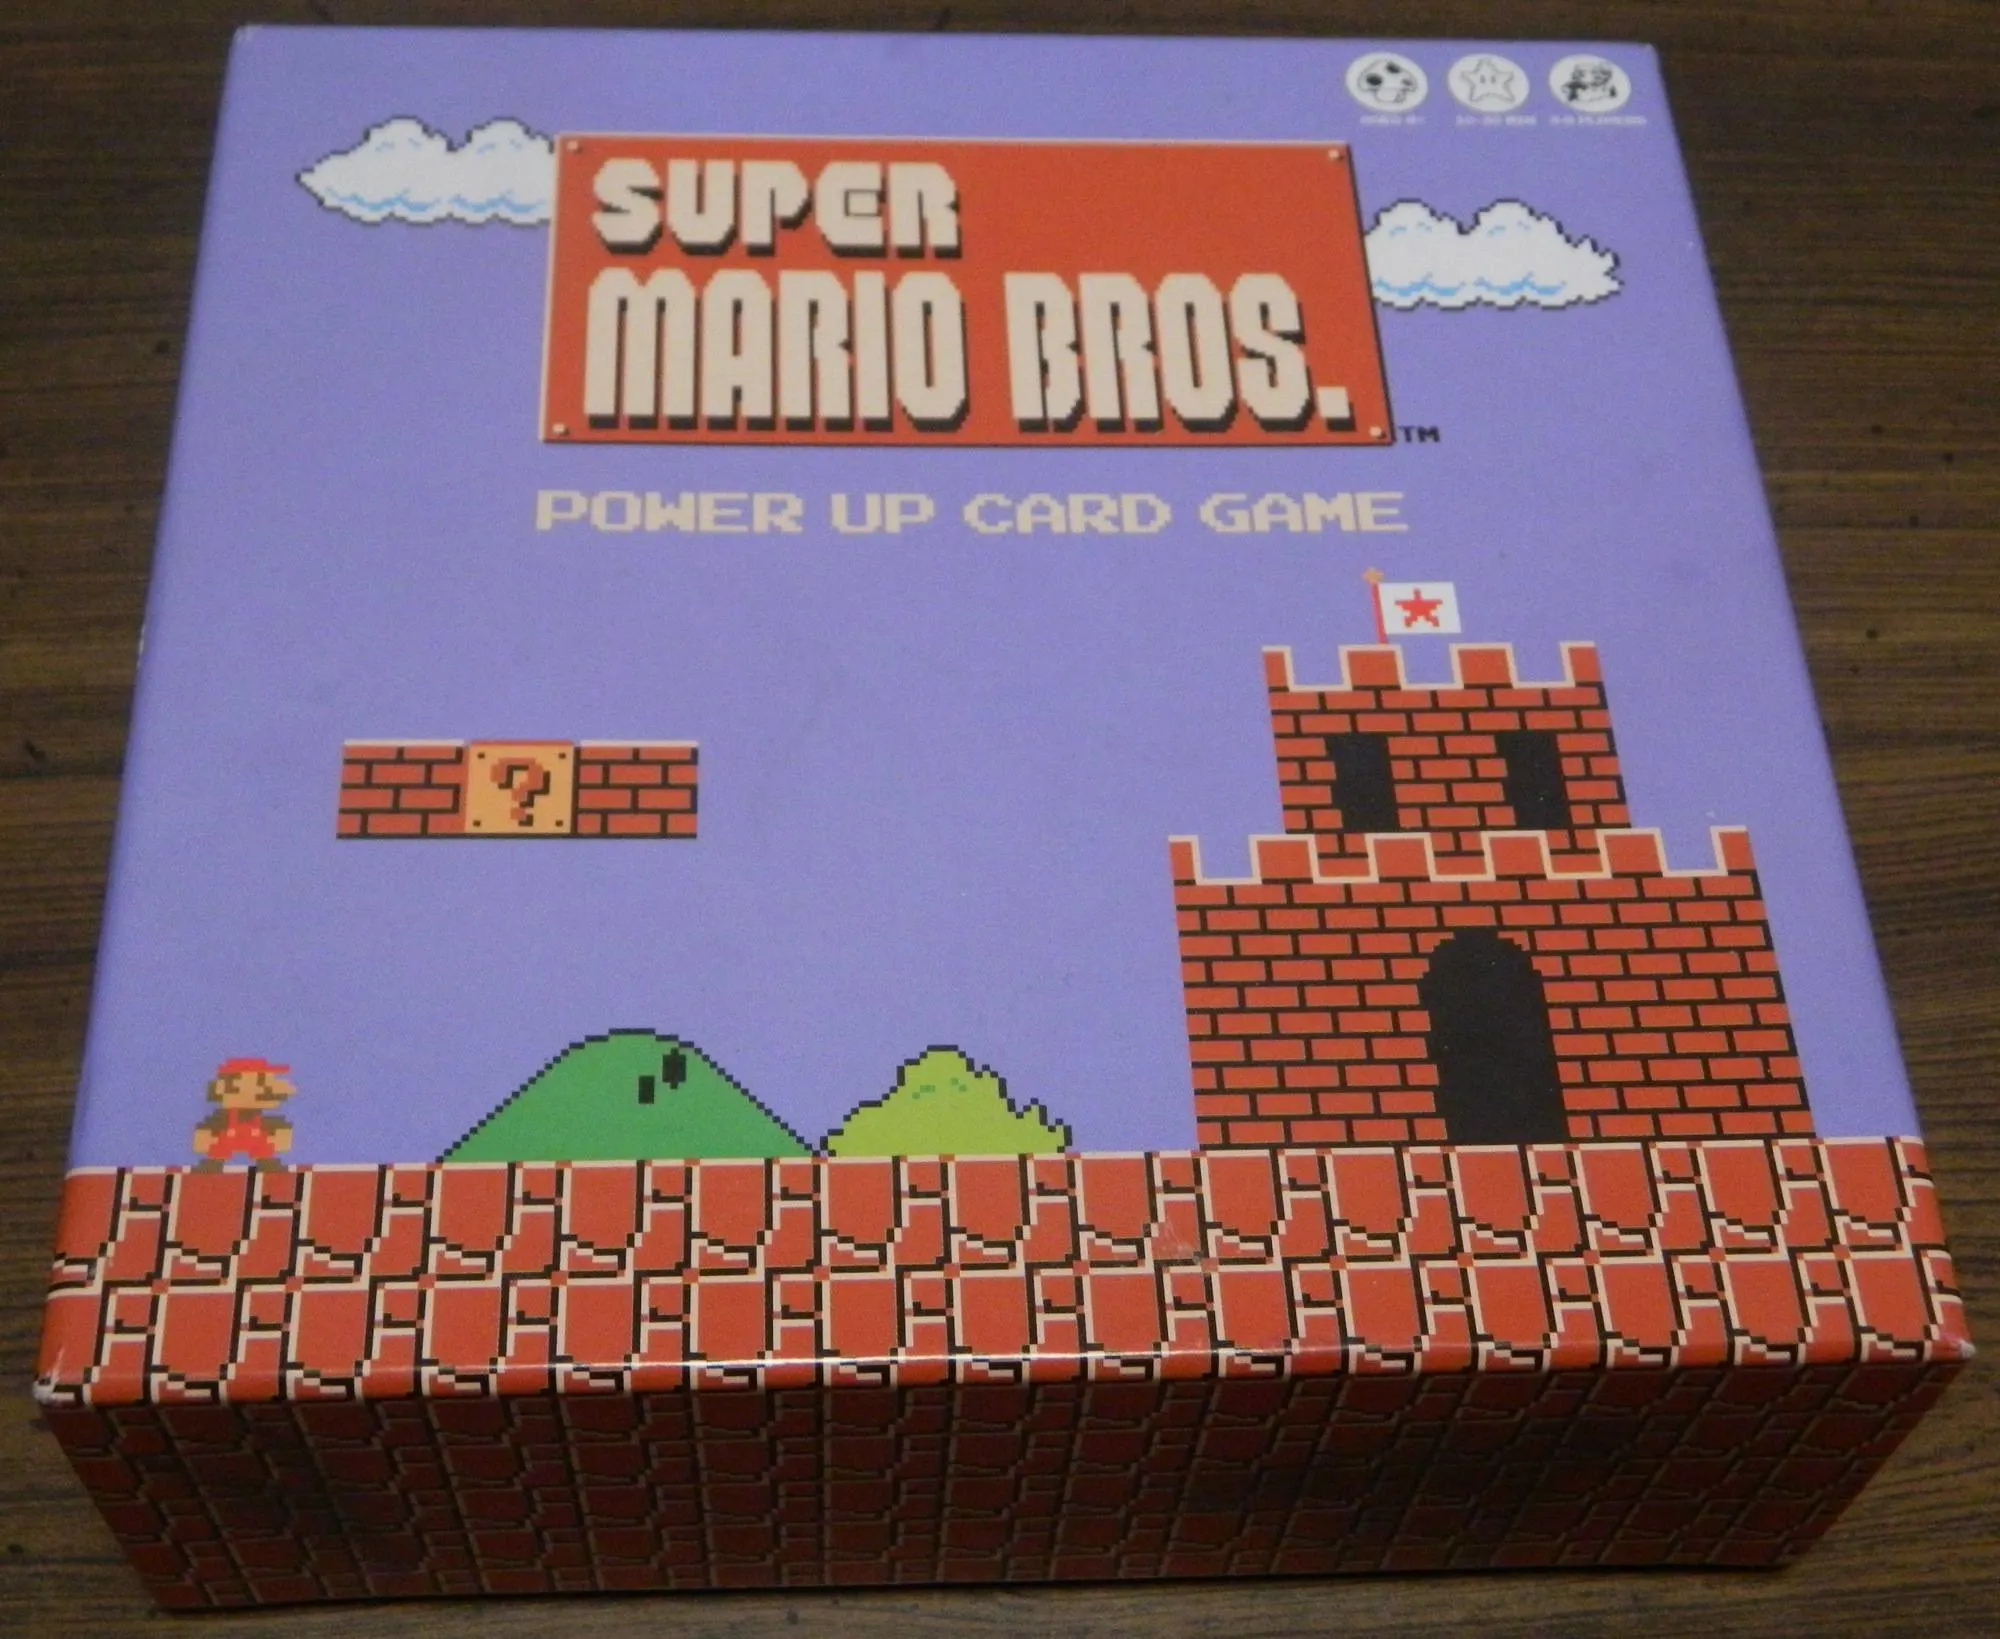 Box for Super Mario Bros. Power Up Card Game